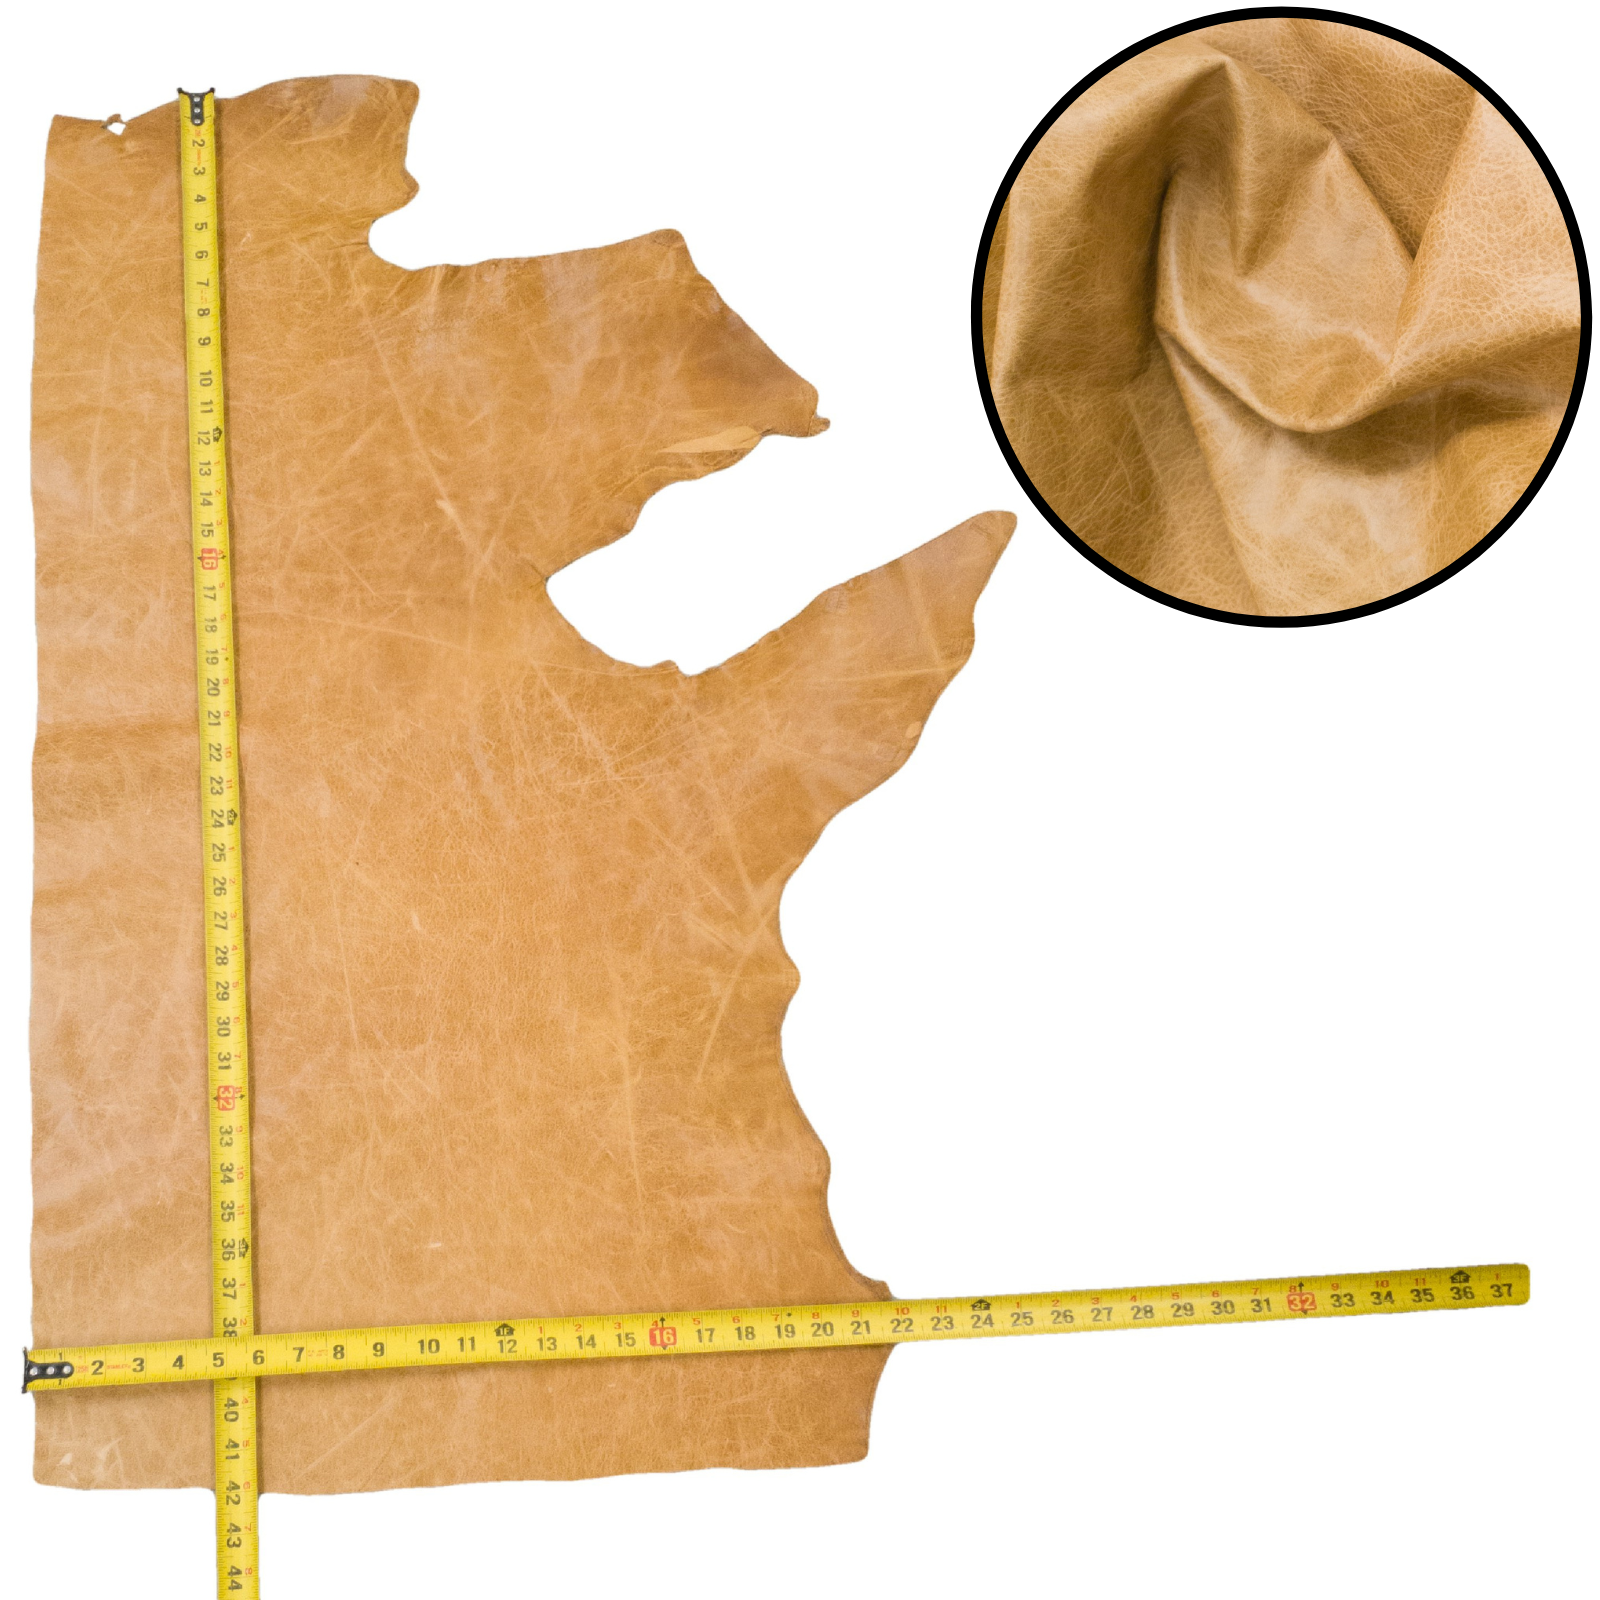 Light Browns, 4-20 Sq Ft Upholstery Cowhide Project Pieces, Beach Sand / 4 / 1 | The Leather Guy